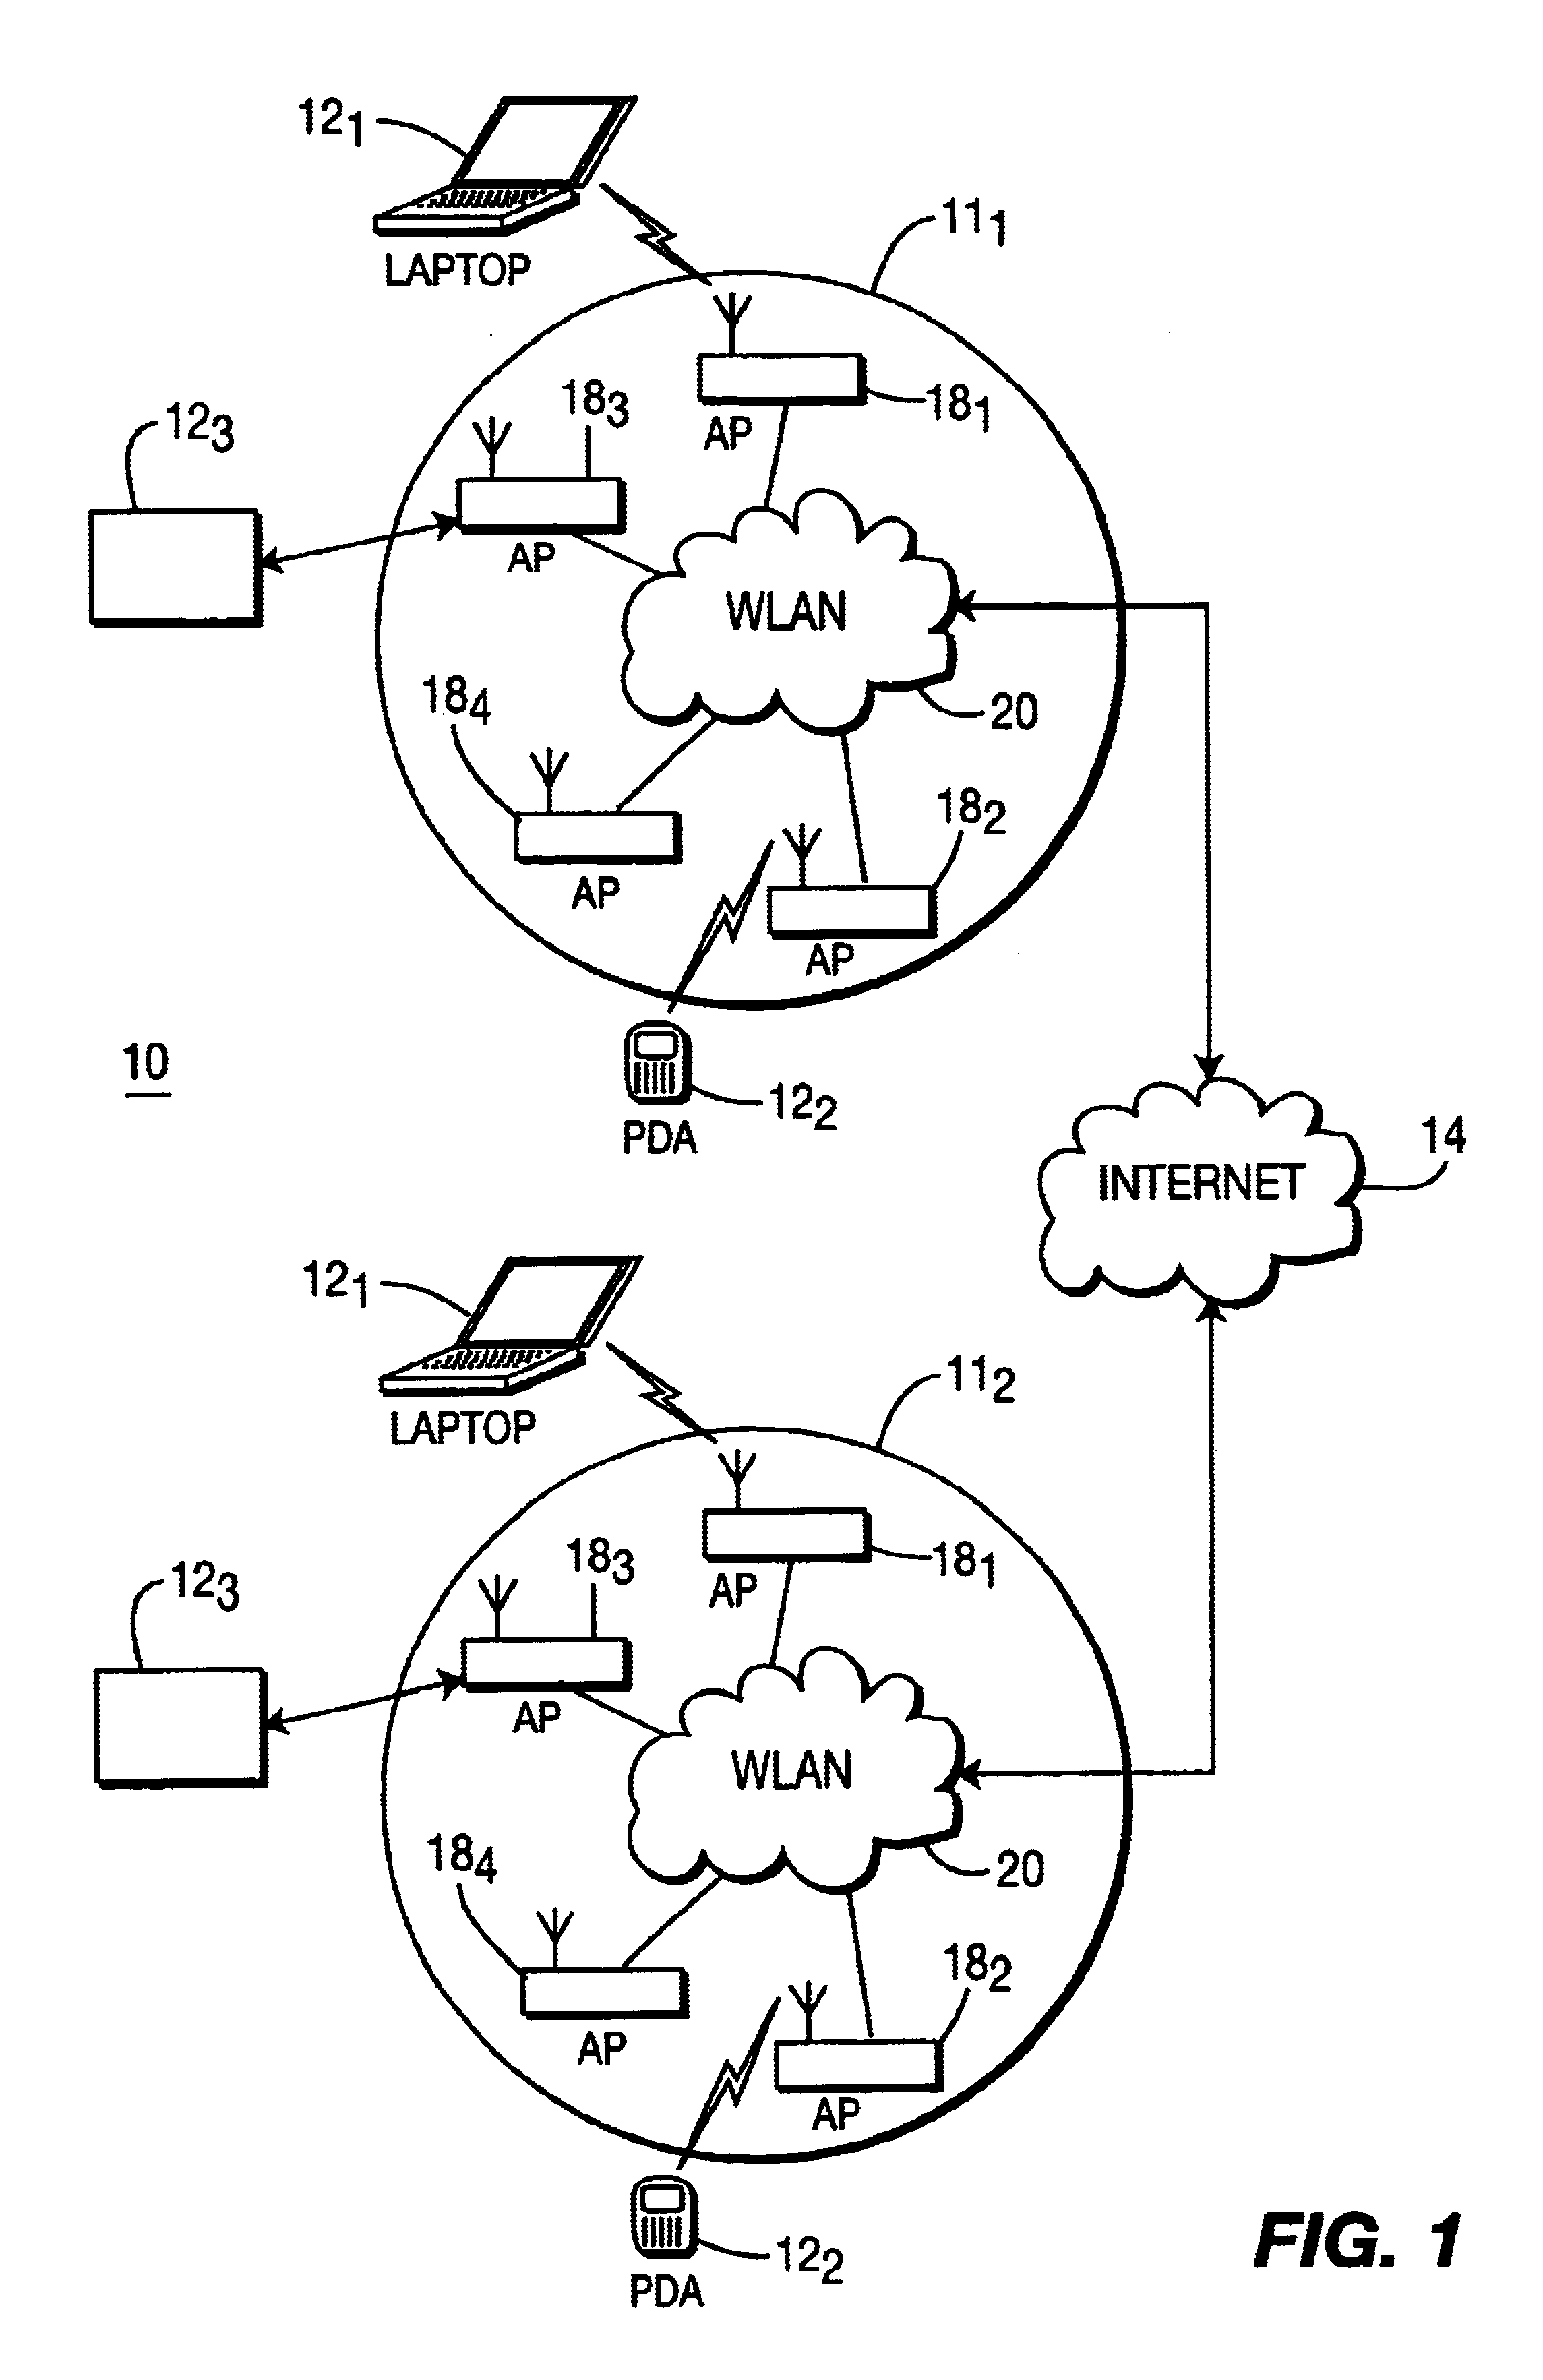 Automatic channel selection in a radio access network